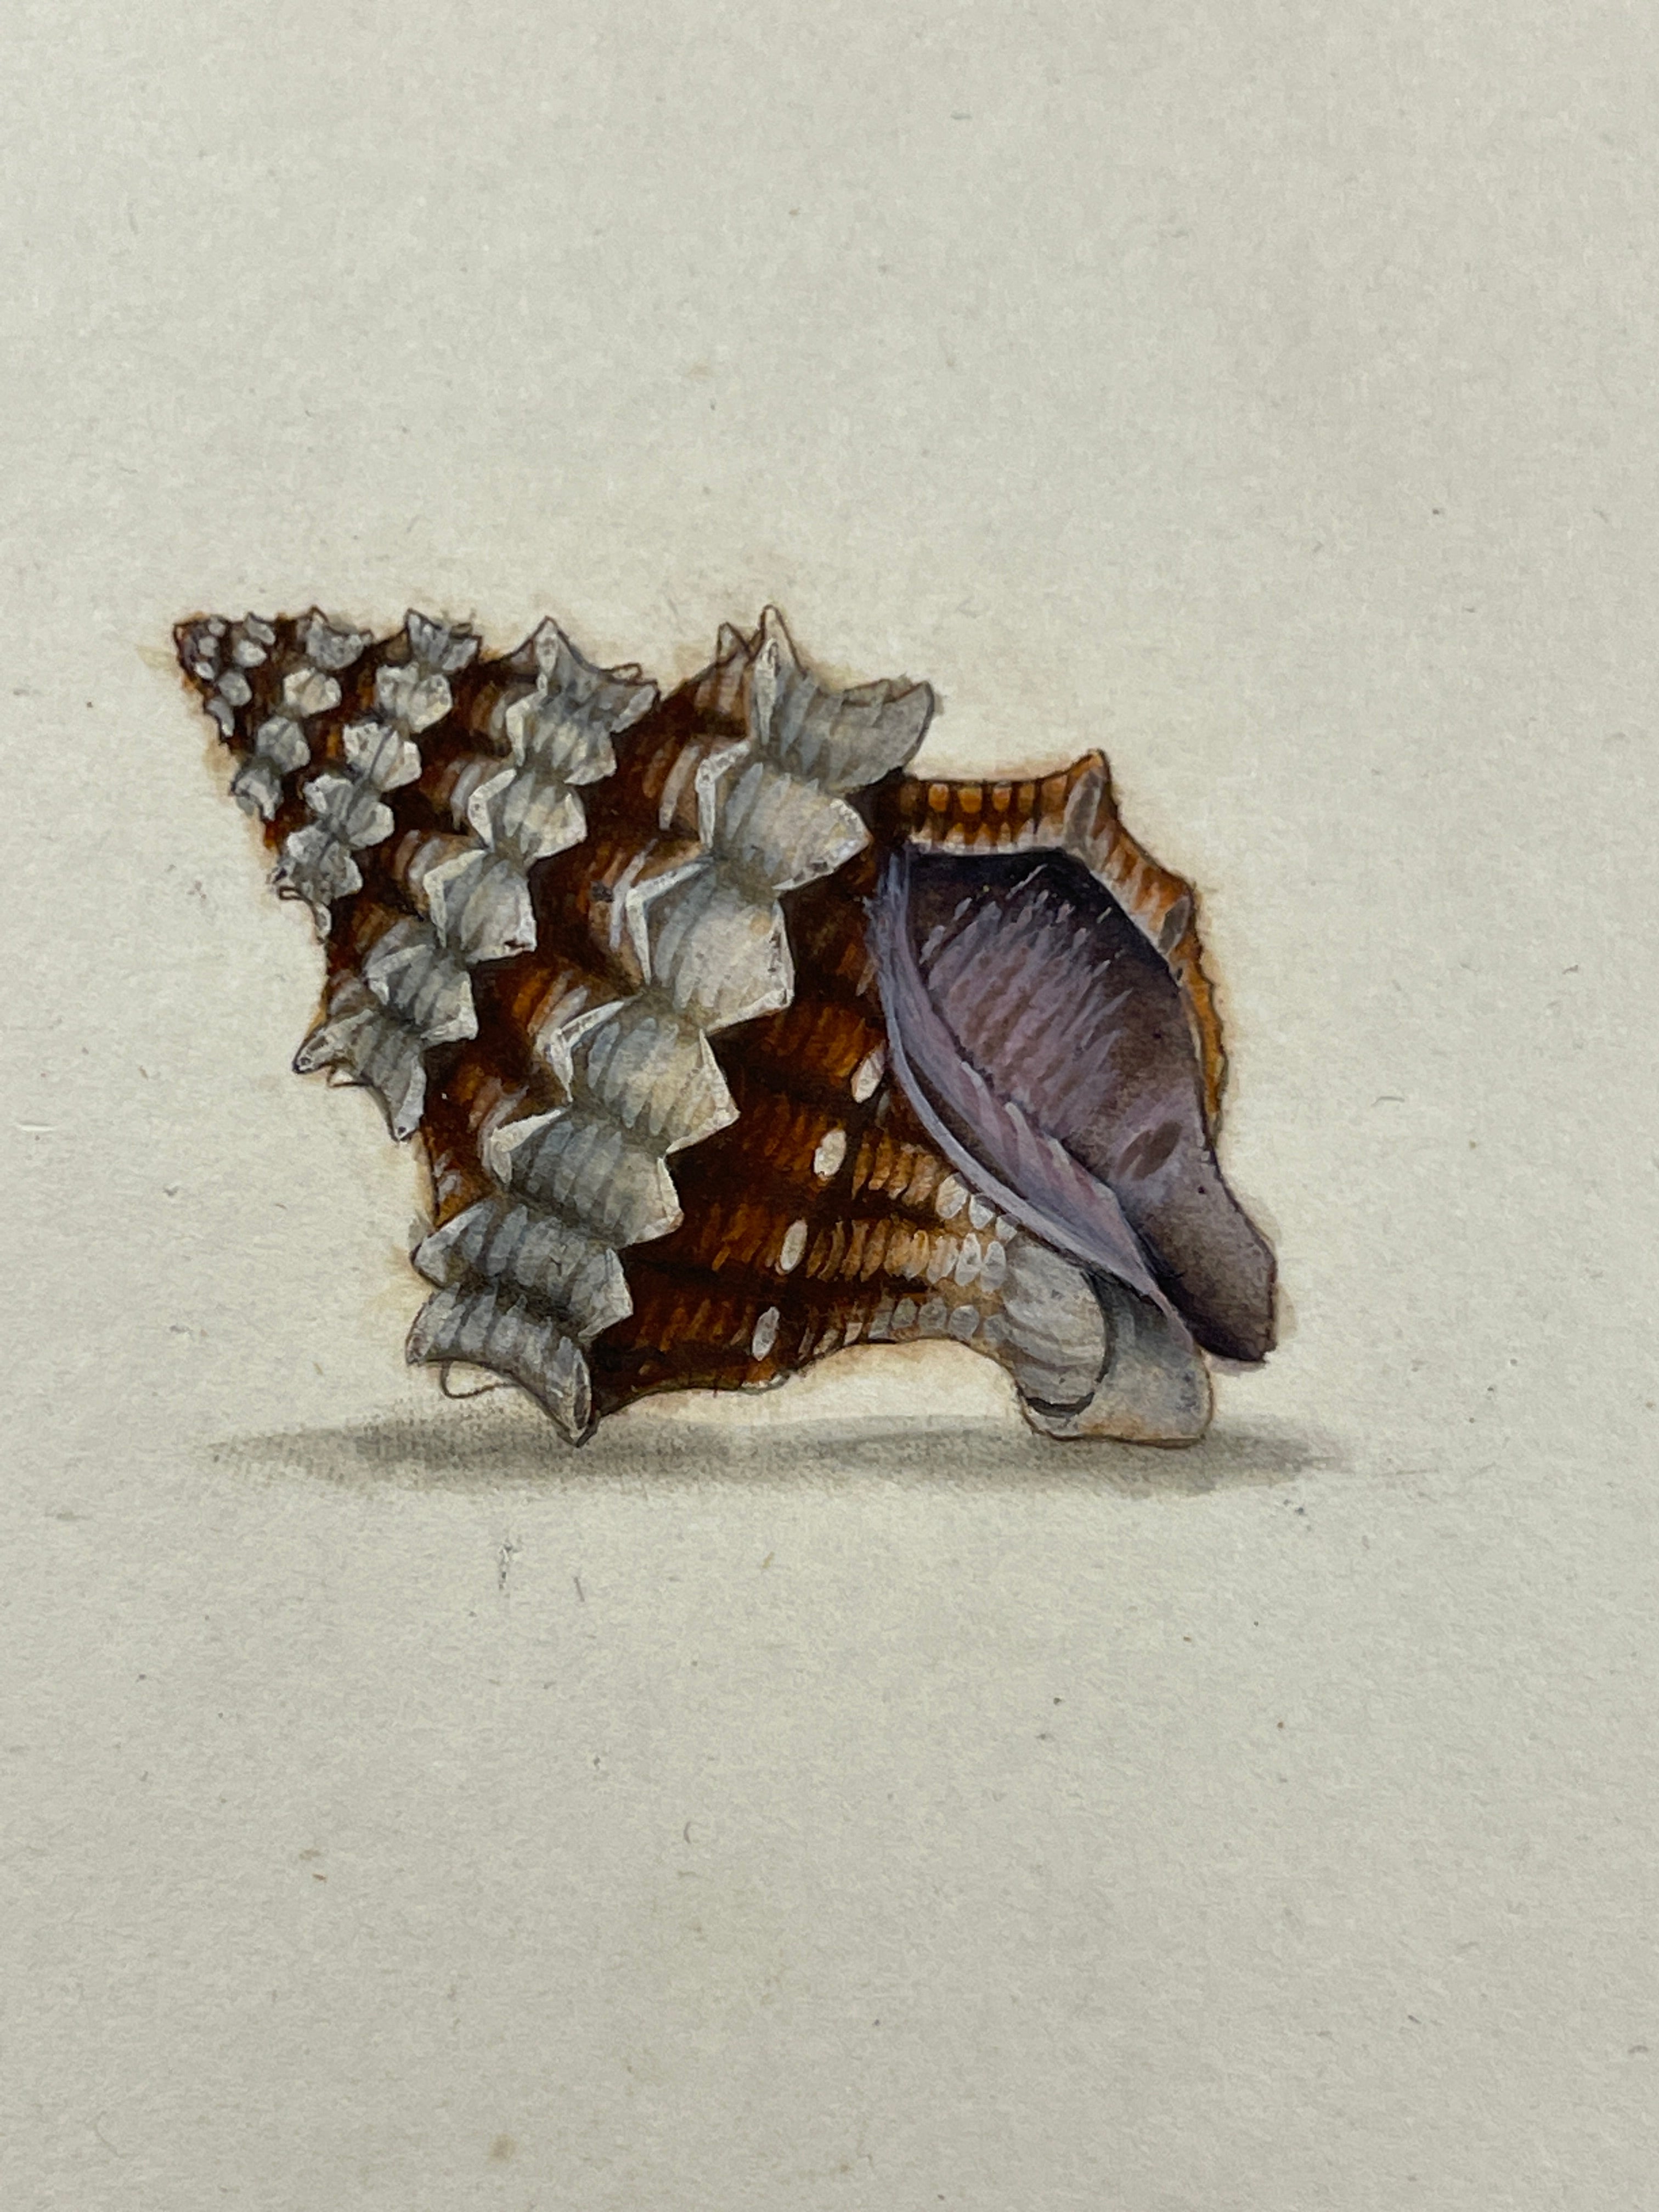 Thomas Martyn 1784 Original Thorn Buccin Shell Print Plate 4 - Found at Friendly Isles - Hand-Colored Tipped-In Engraving